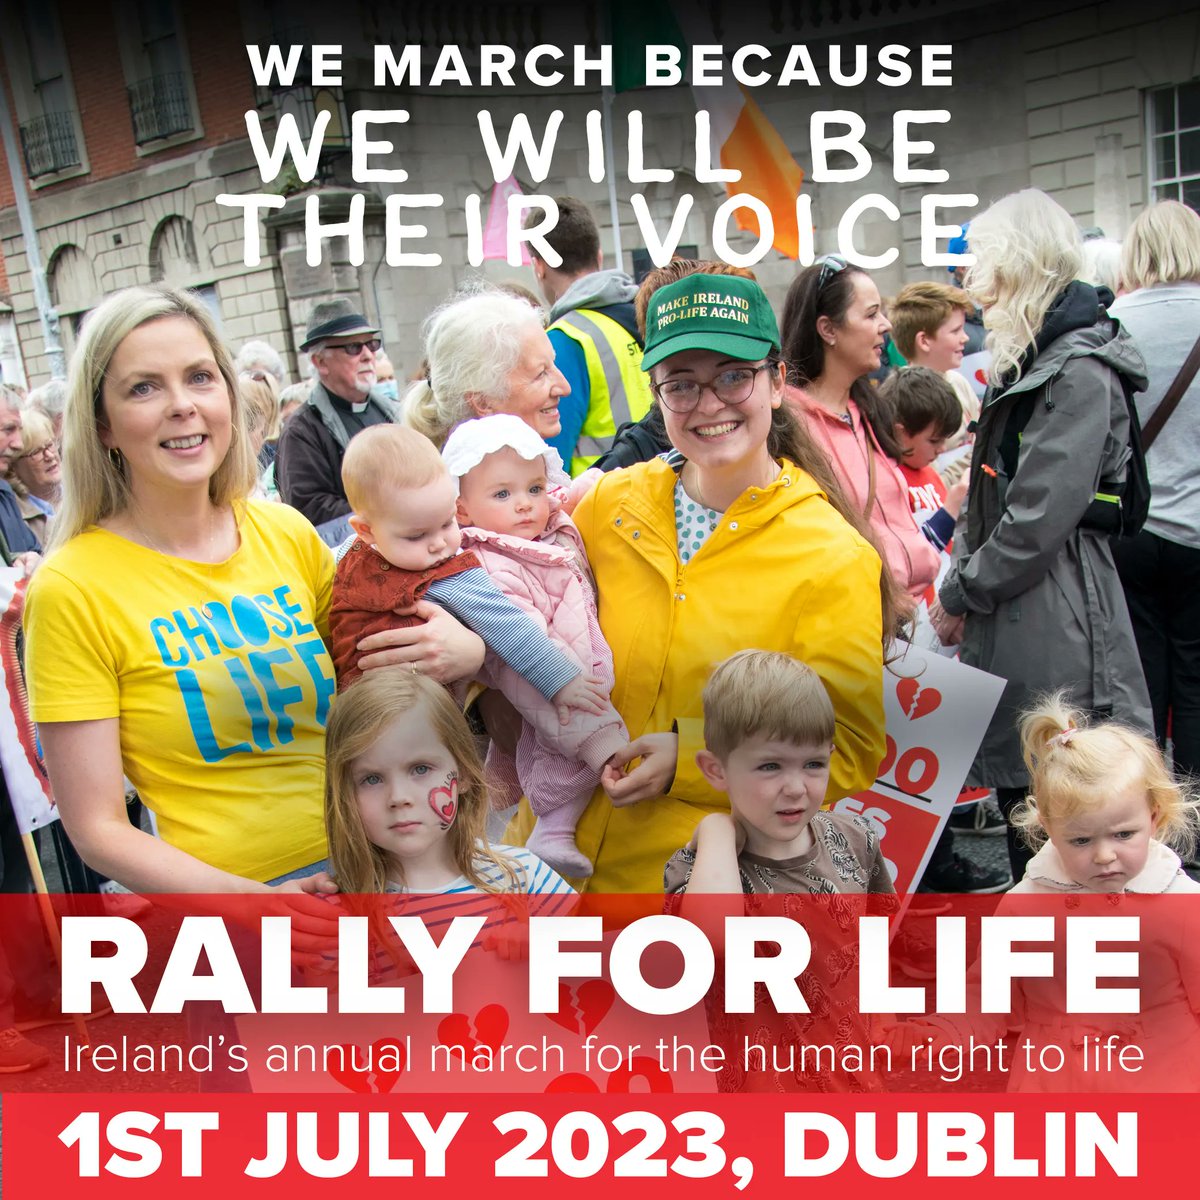 Join us NEXT WEEK for the All Ireland Rally for Life on Saturday 1st July at 1pm in Parnell Sq and be a voice for the unborn!

Also, don’t forget to check out the RALLYFEST taking place from 11am before the Rally in Abbey Church right in Parnell Sq.

#StopAbortingOurFuture